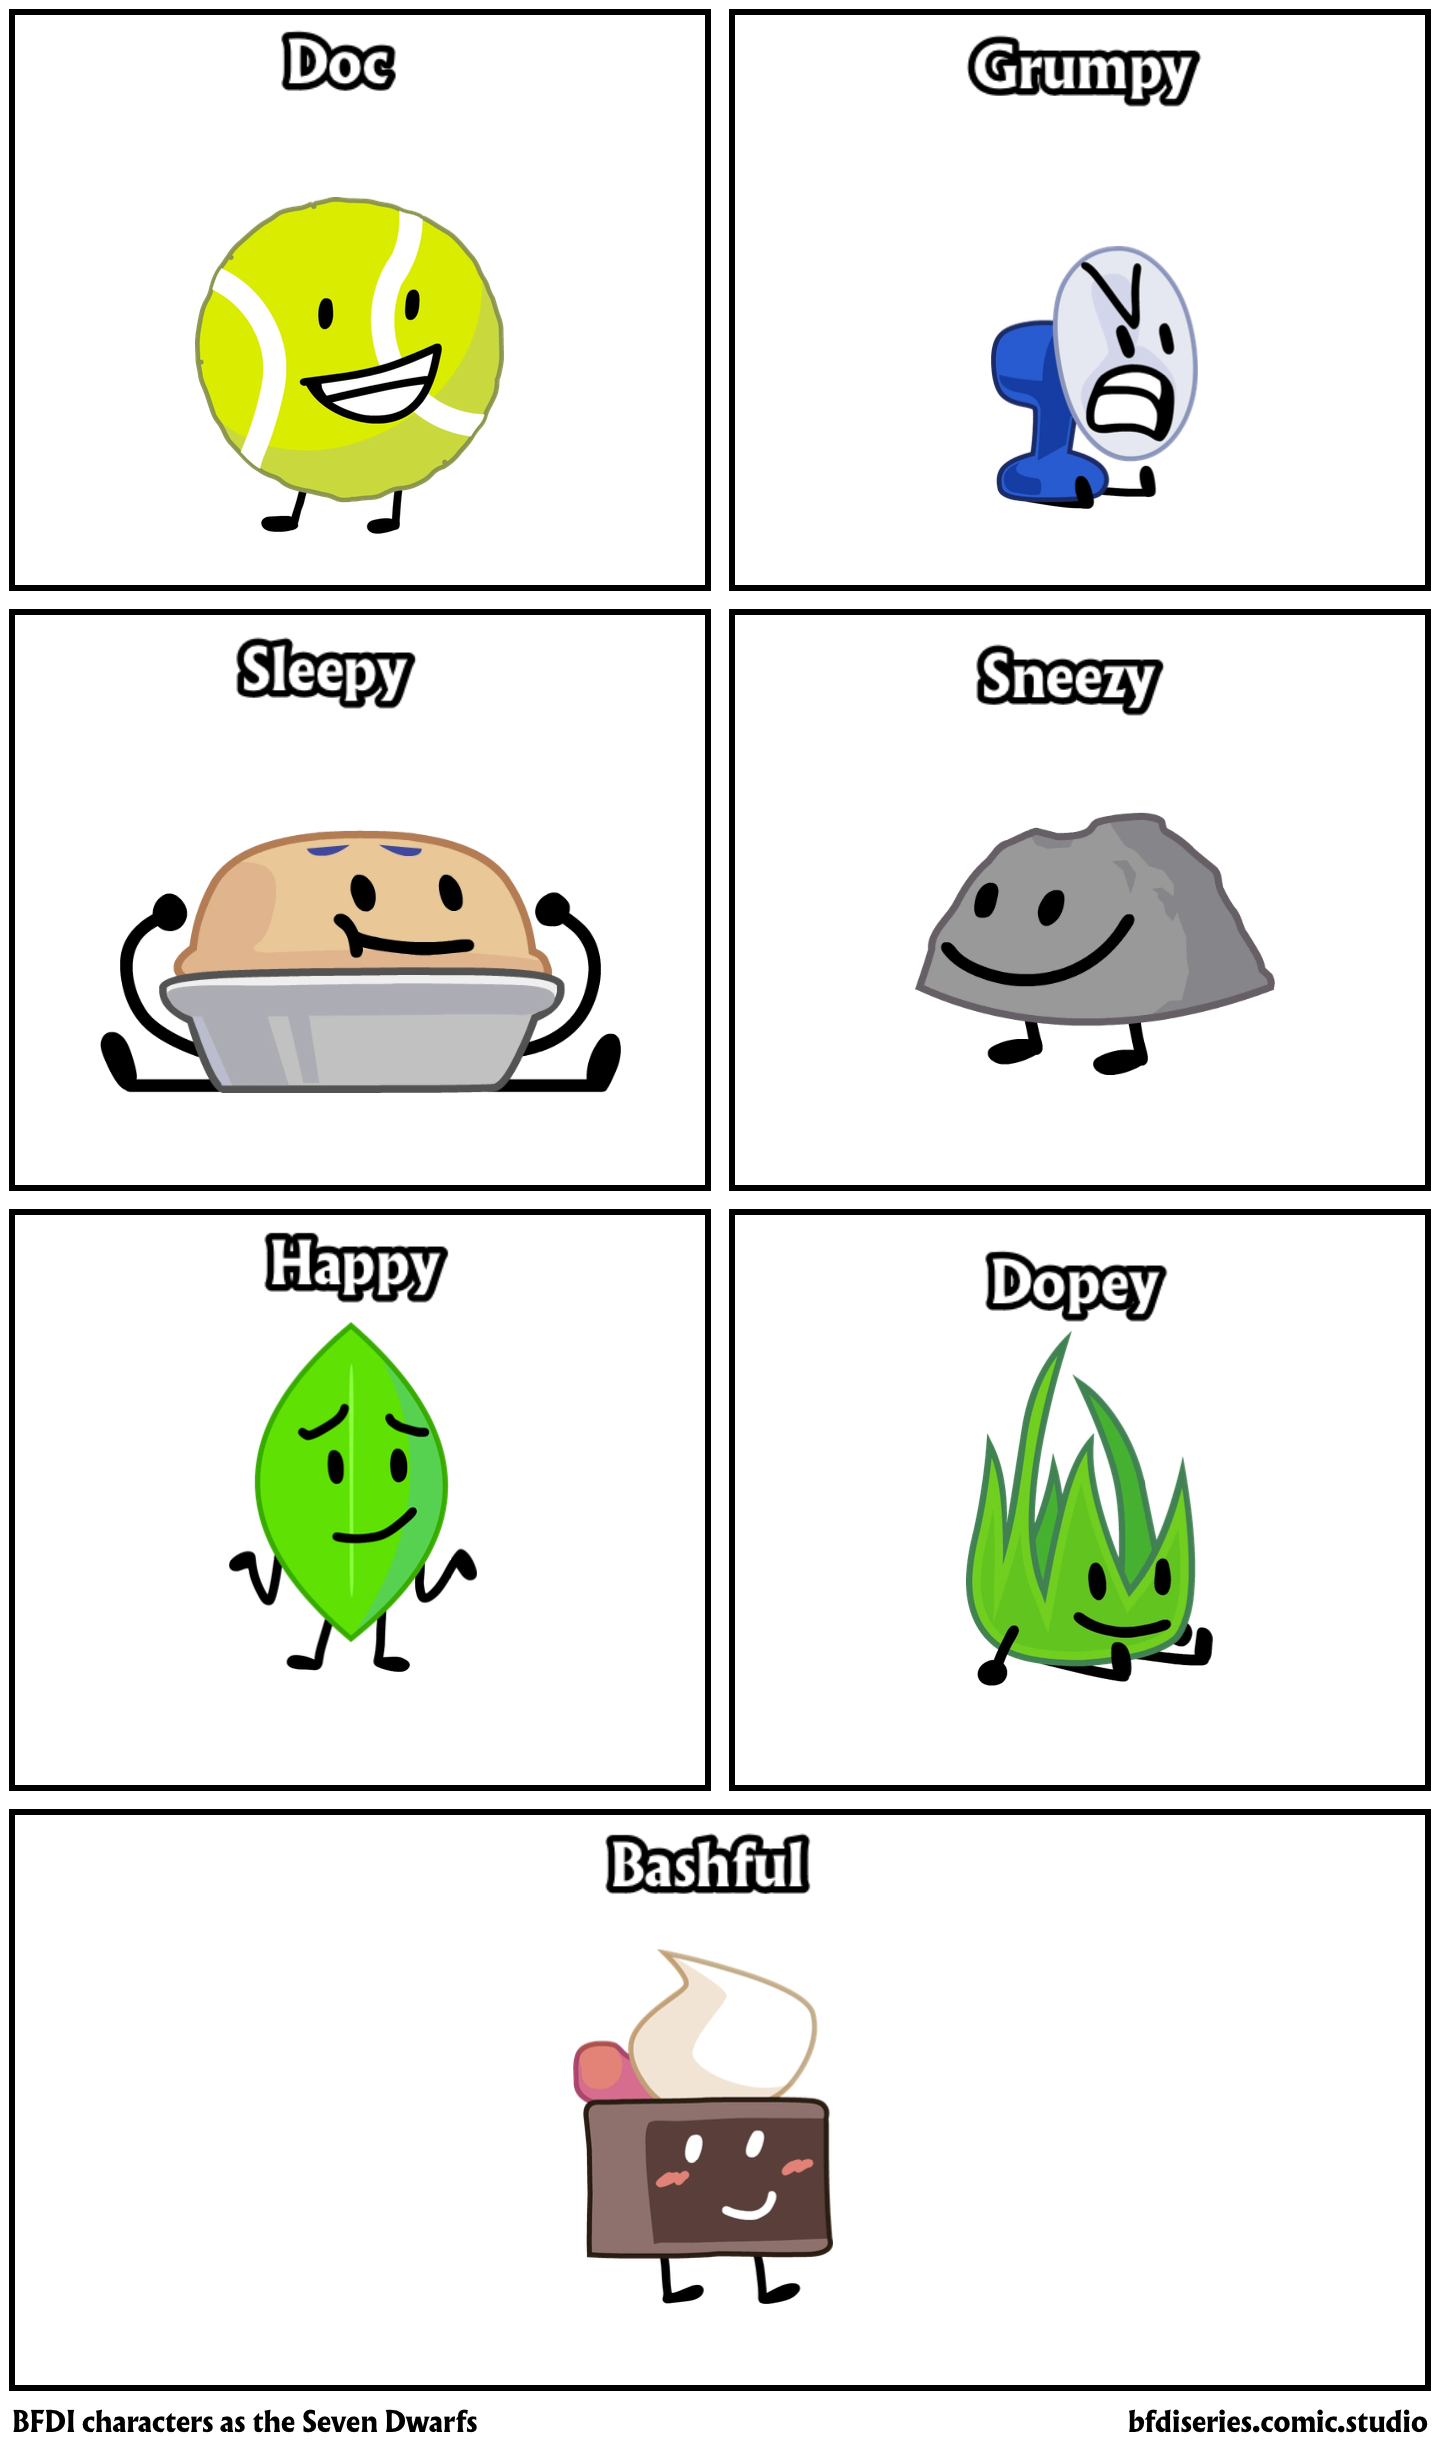 BFDI characters as the Seven Dwarfs